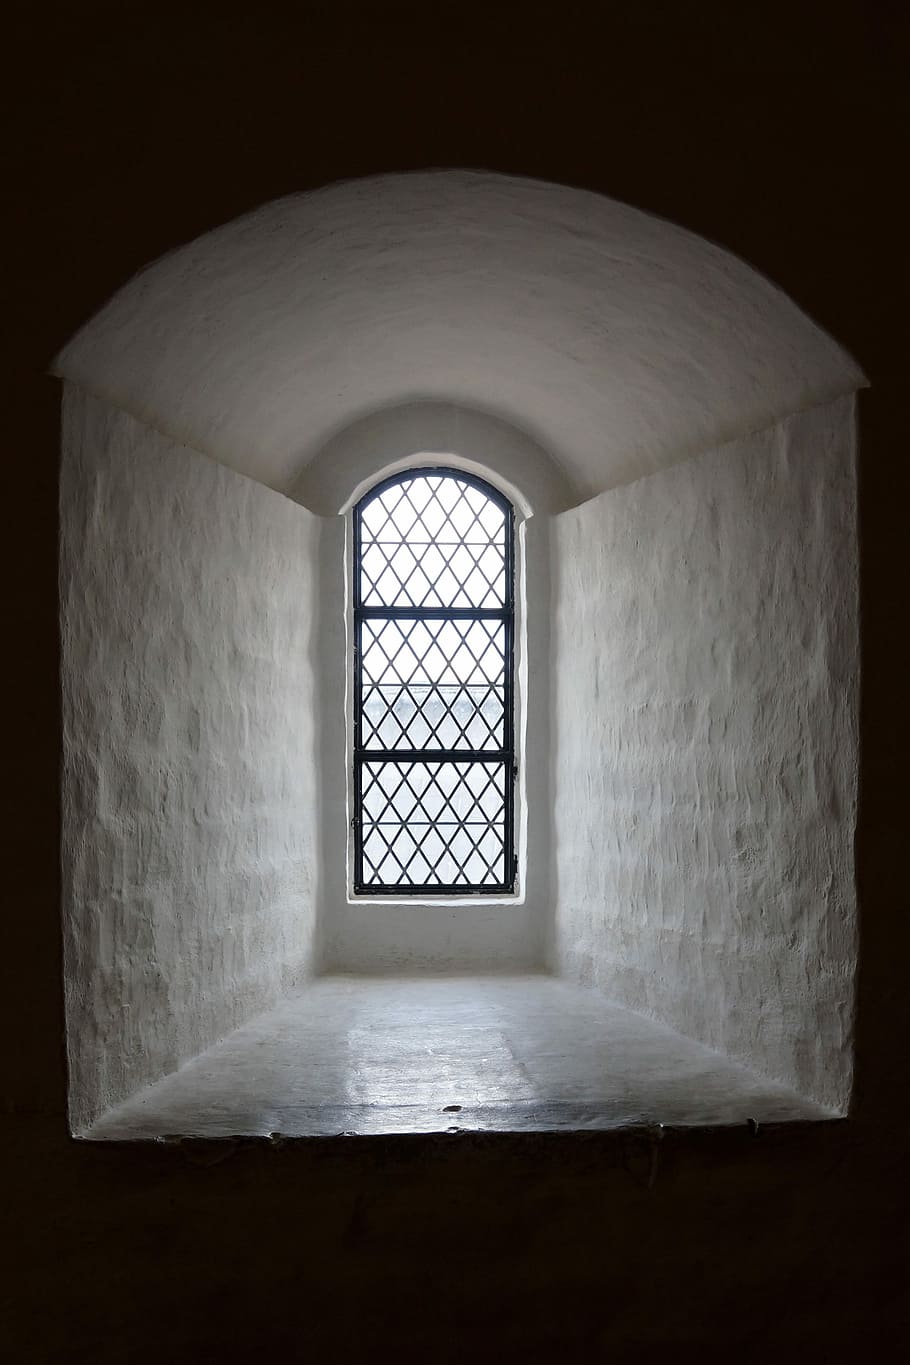 Window, Recess, Castle, the window recess, castle window, white wall, inside the box, architecture, indoors, architecture And Buildings